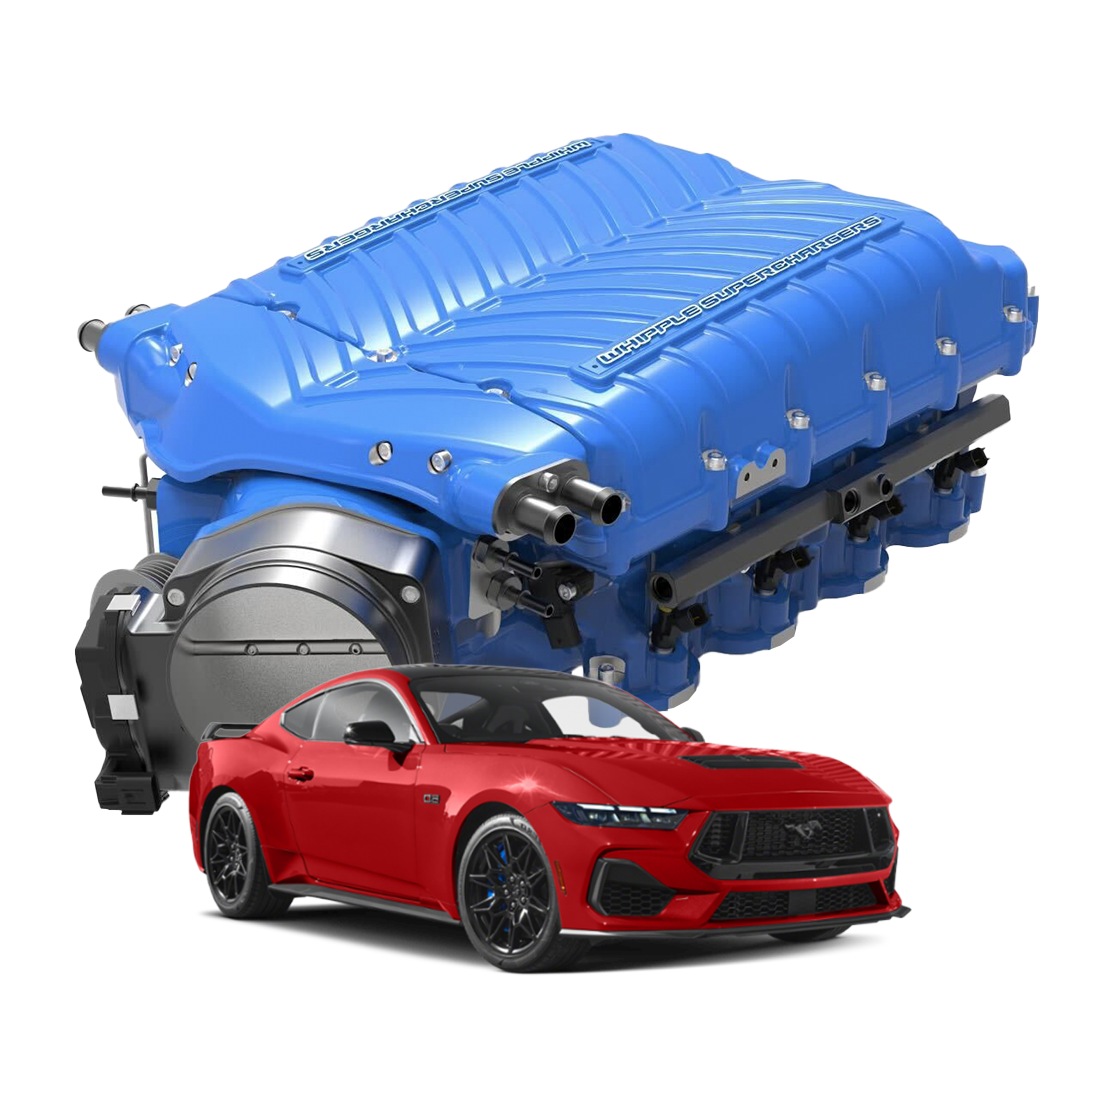 S650 Mustang Whipple Gen 6 Supercharger coming for 2024 Mustang S650 2024mustangwhipple